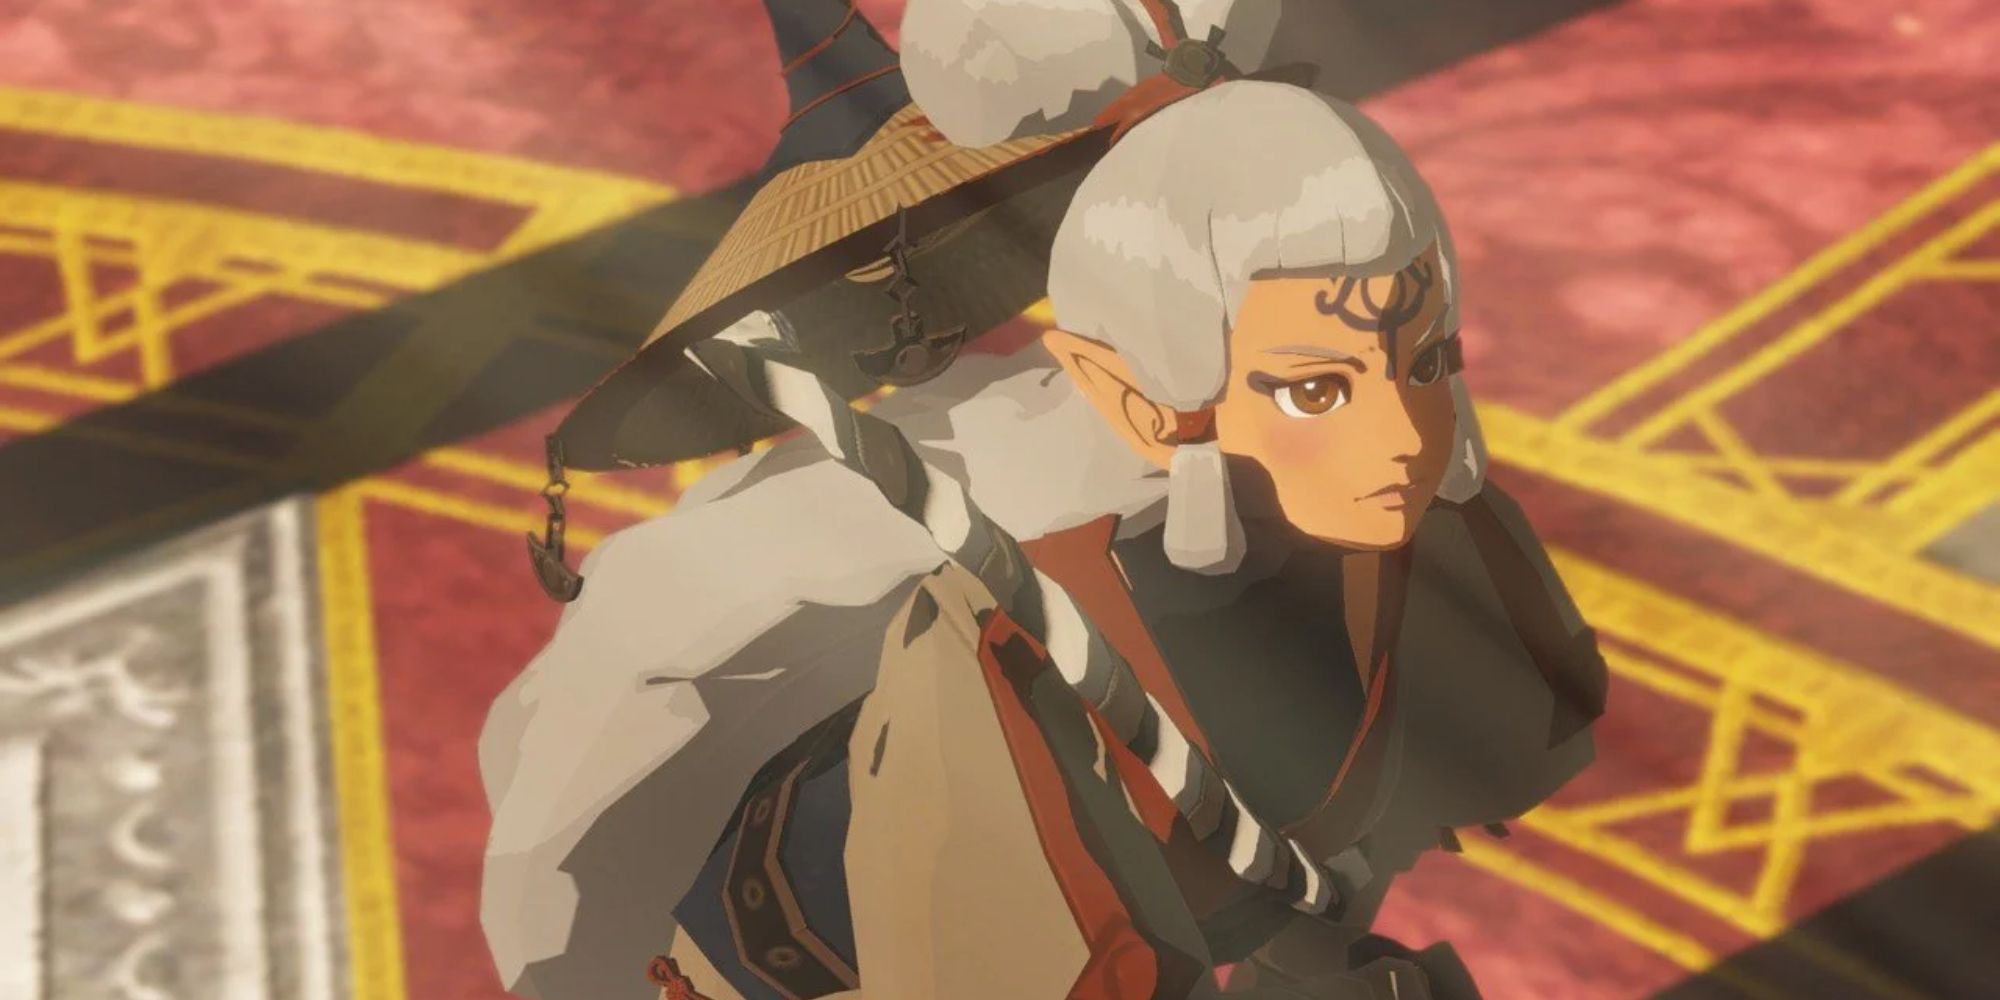 Impa is kneeling in Age of Calamity